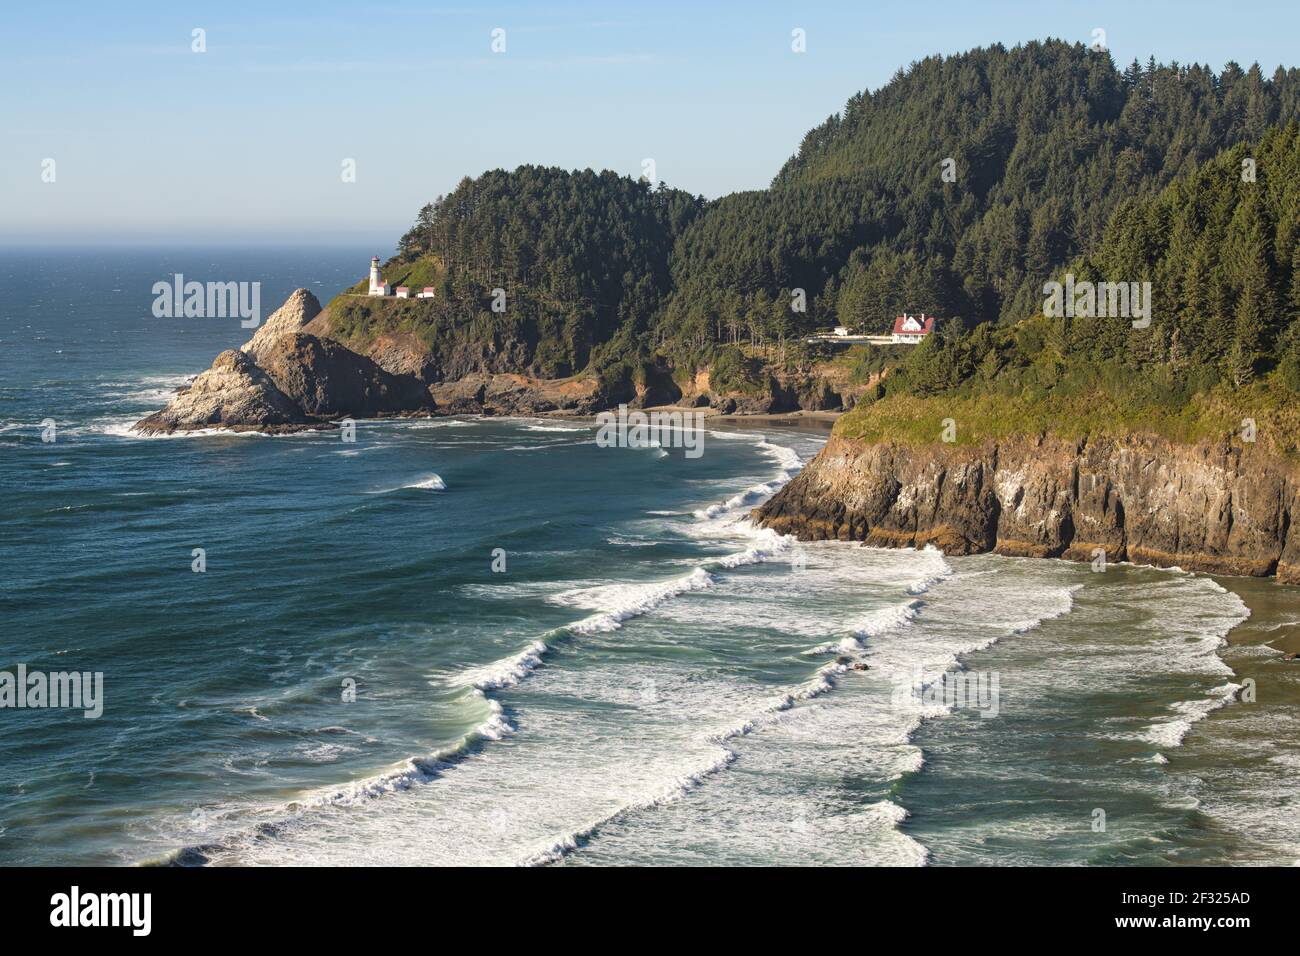 Heceta Head Lighthouse on the Central Oregon Coast and Devils Elbow cliff in the foreground with waves from the Pacific Ocean Stock Photo